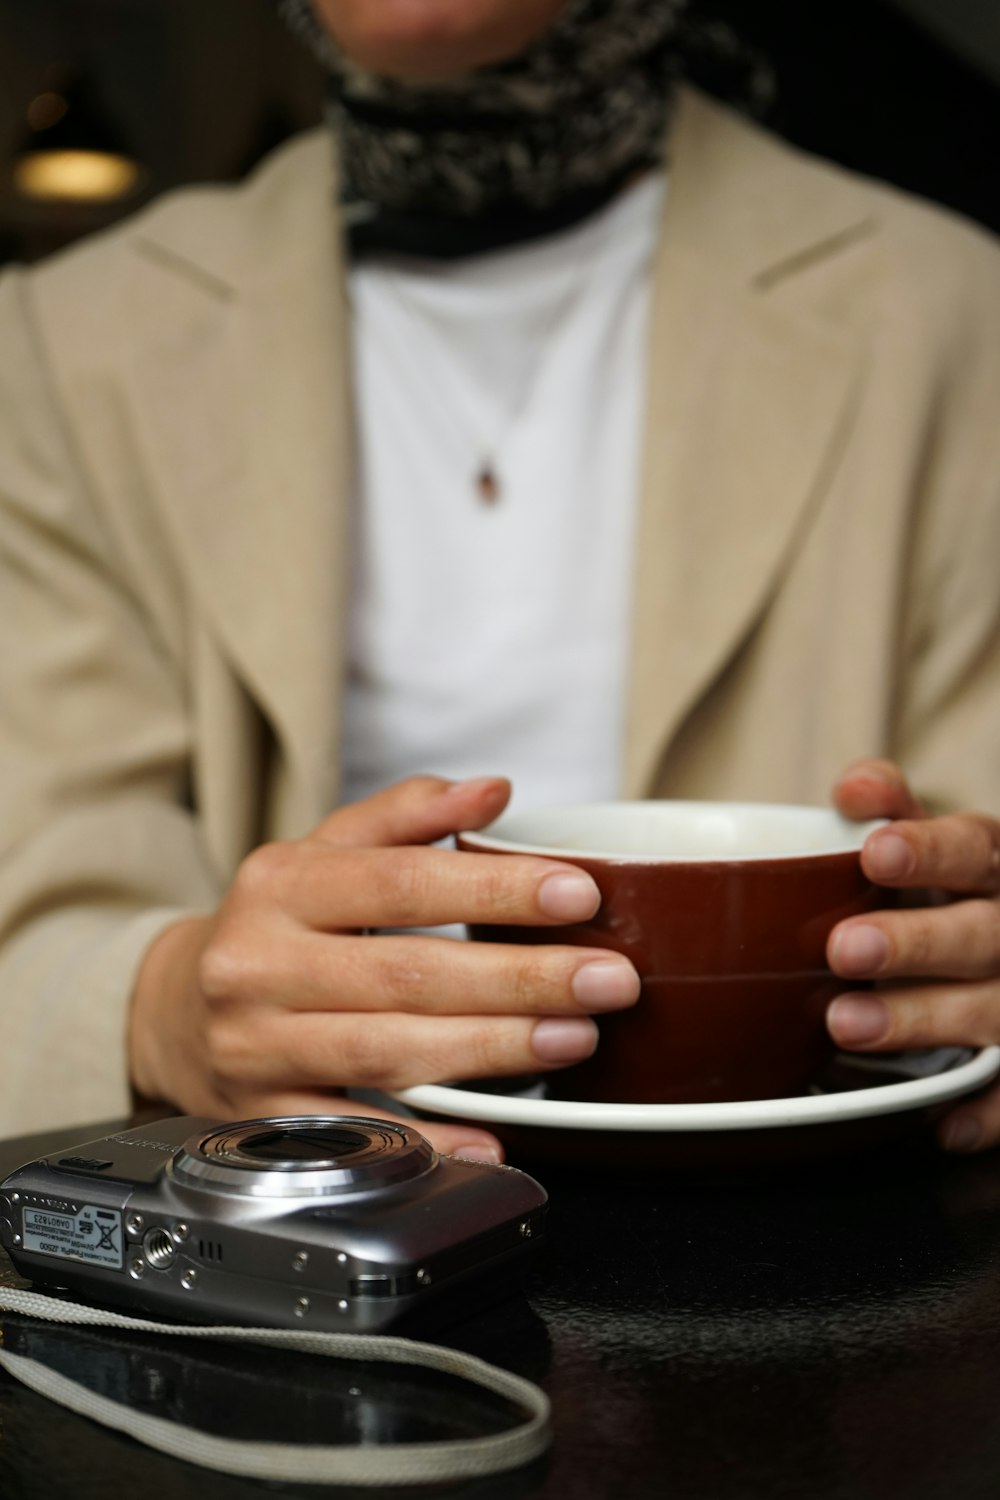 a person holding a coffee cup and a cell phone